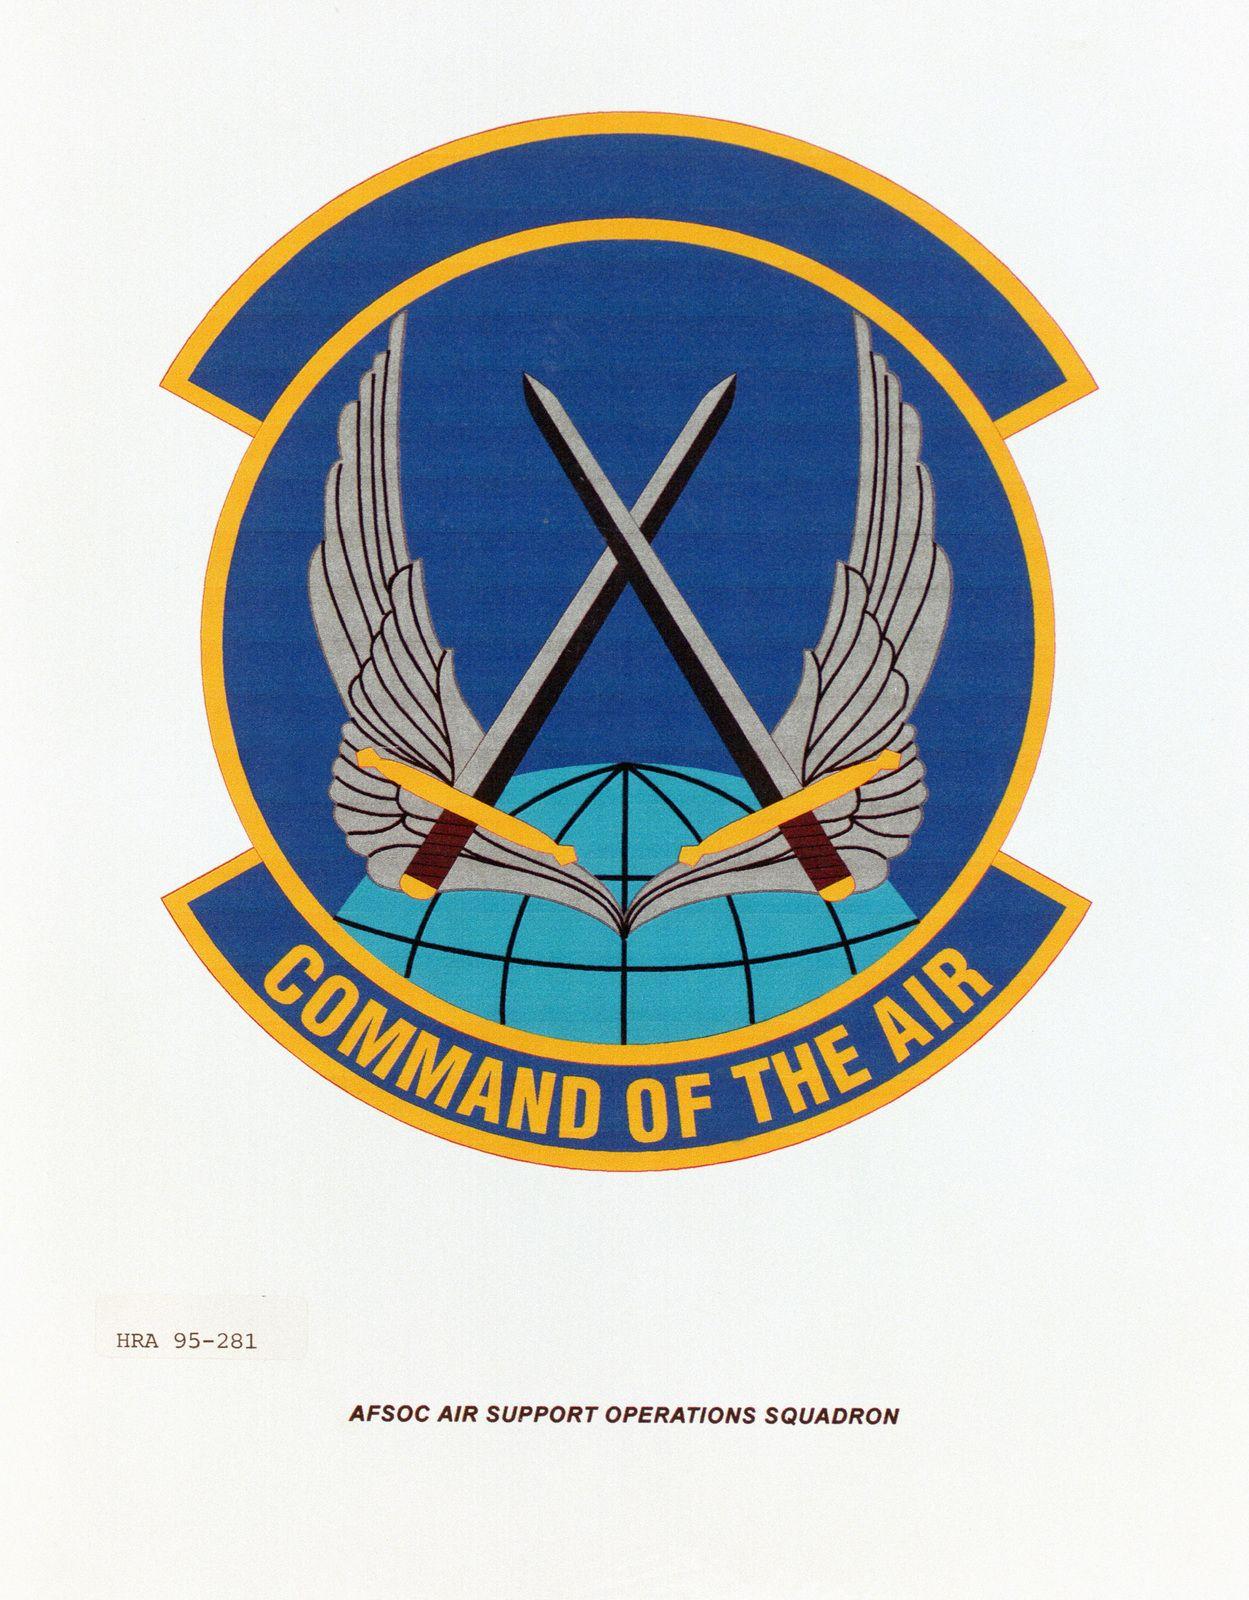 AFSOC Logo - Approved insignia for the AFSOC Air Support Operations Squadron ...